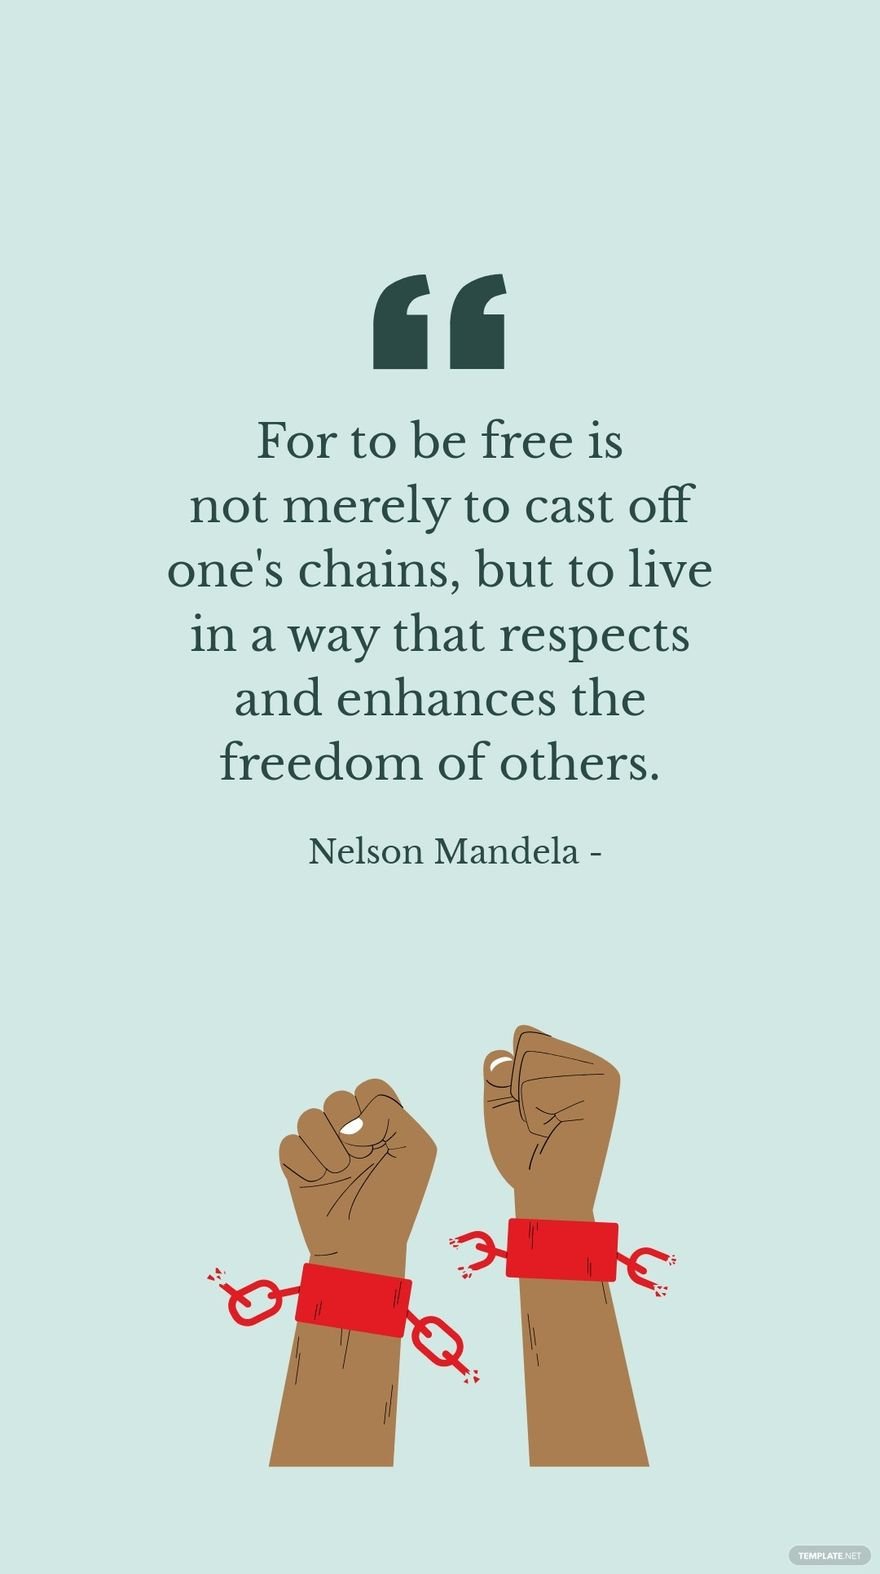 Nelson Mandela - For to be is not merely to cast off one's chains, but to live in a way that respects and enhances the freedom of others.